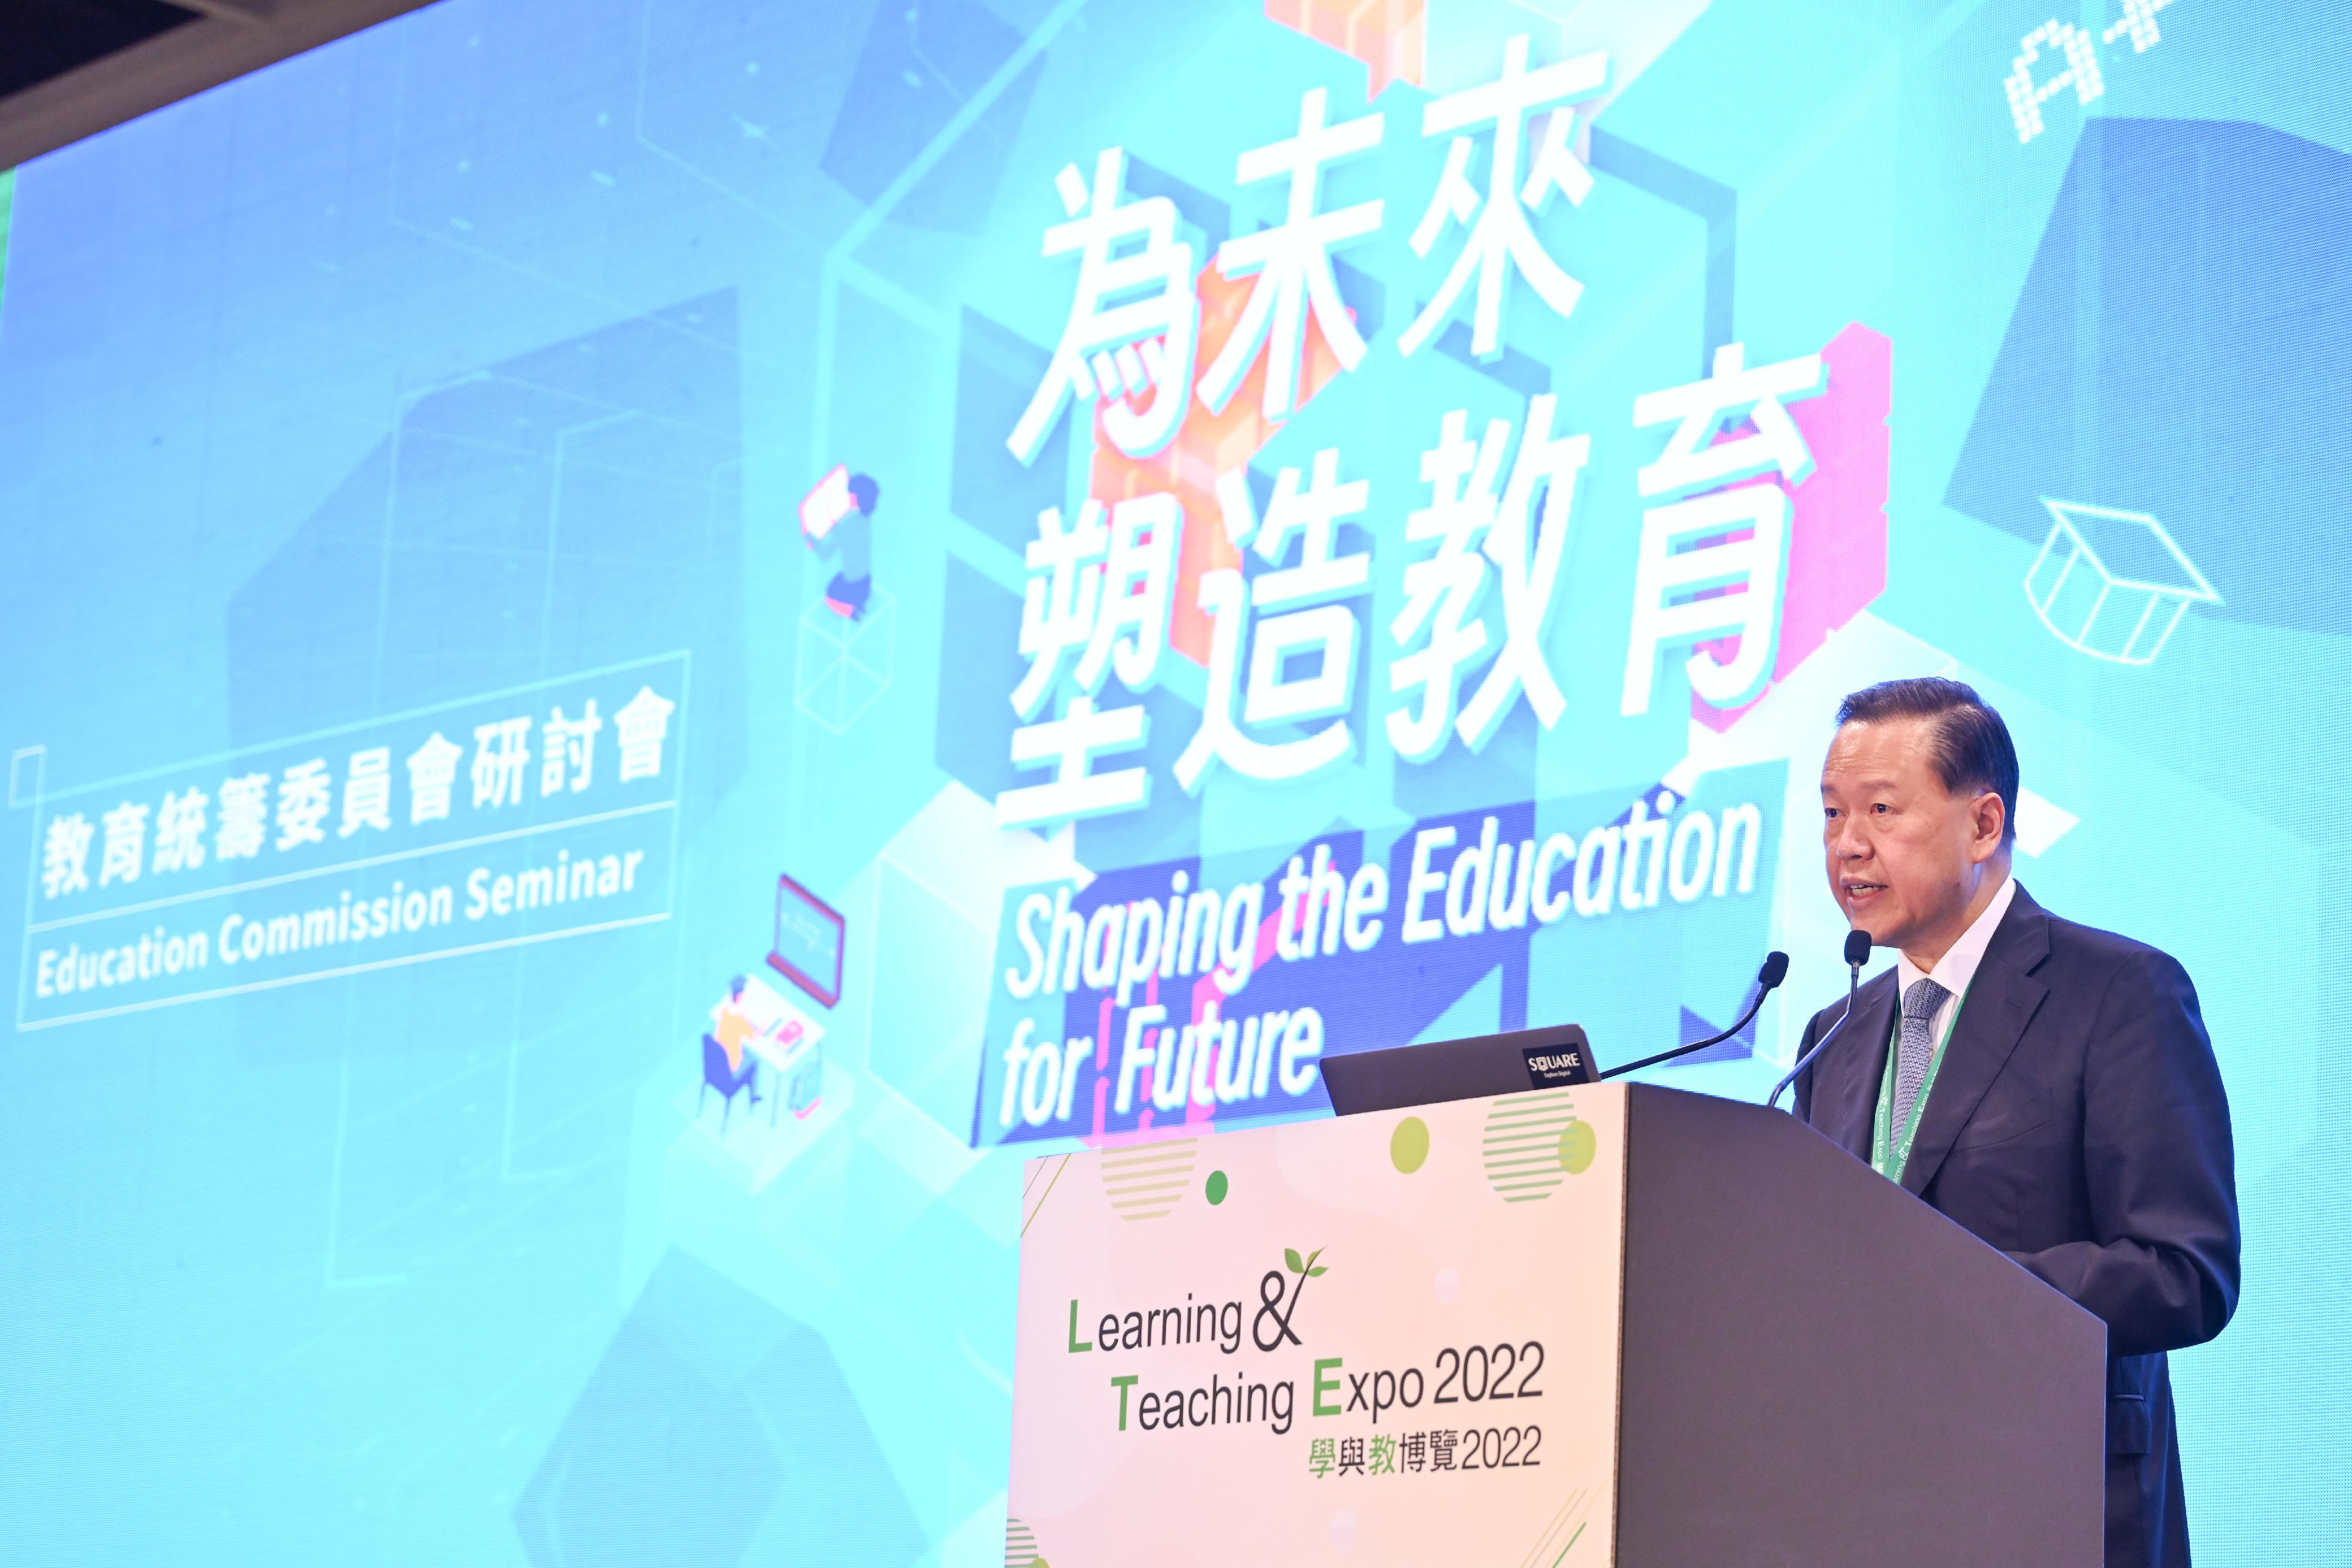 The Chairman of the Education Commission, Mr Tim Lui, delivers welcome remarks at the Shaping the Education for Future Seminar organised by the Commission today (December 8).  